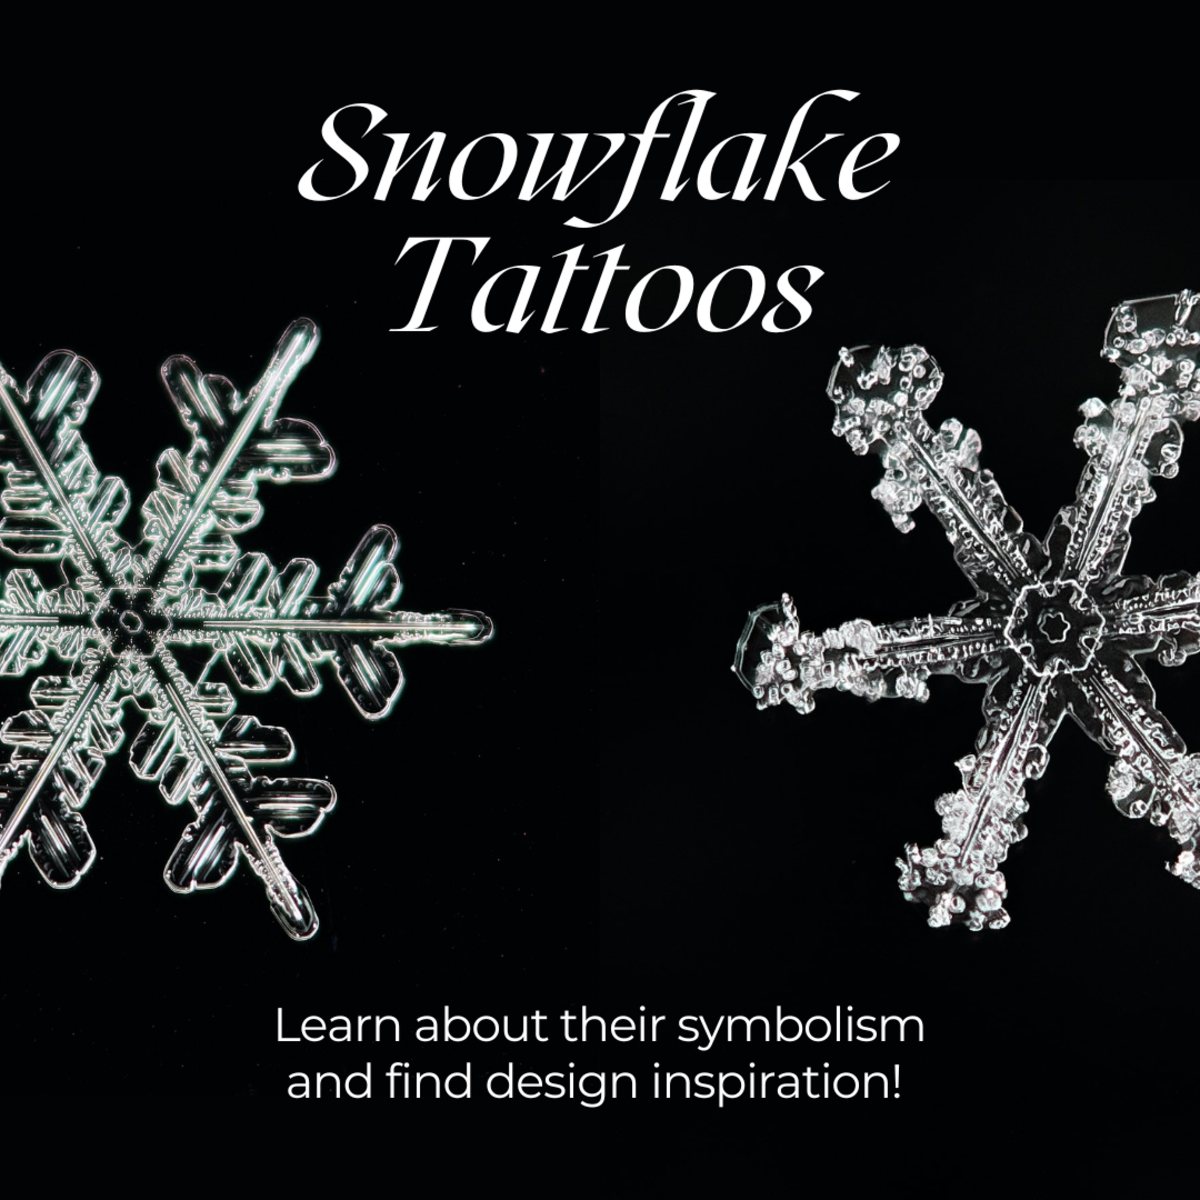 This article will look at some of the meanings and symbolism of snowflake tattoos and provide lots of examples for those looking for inspiration.